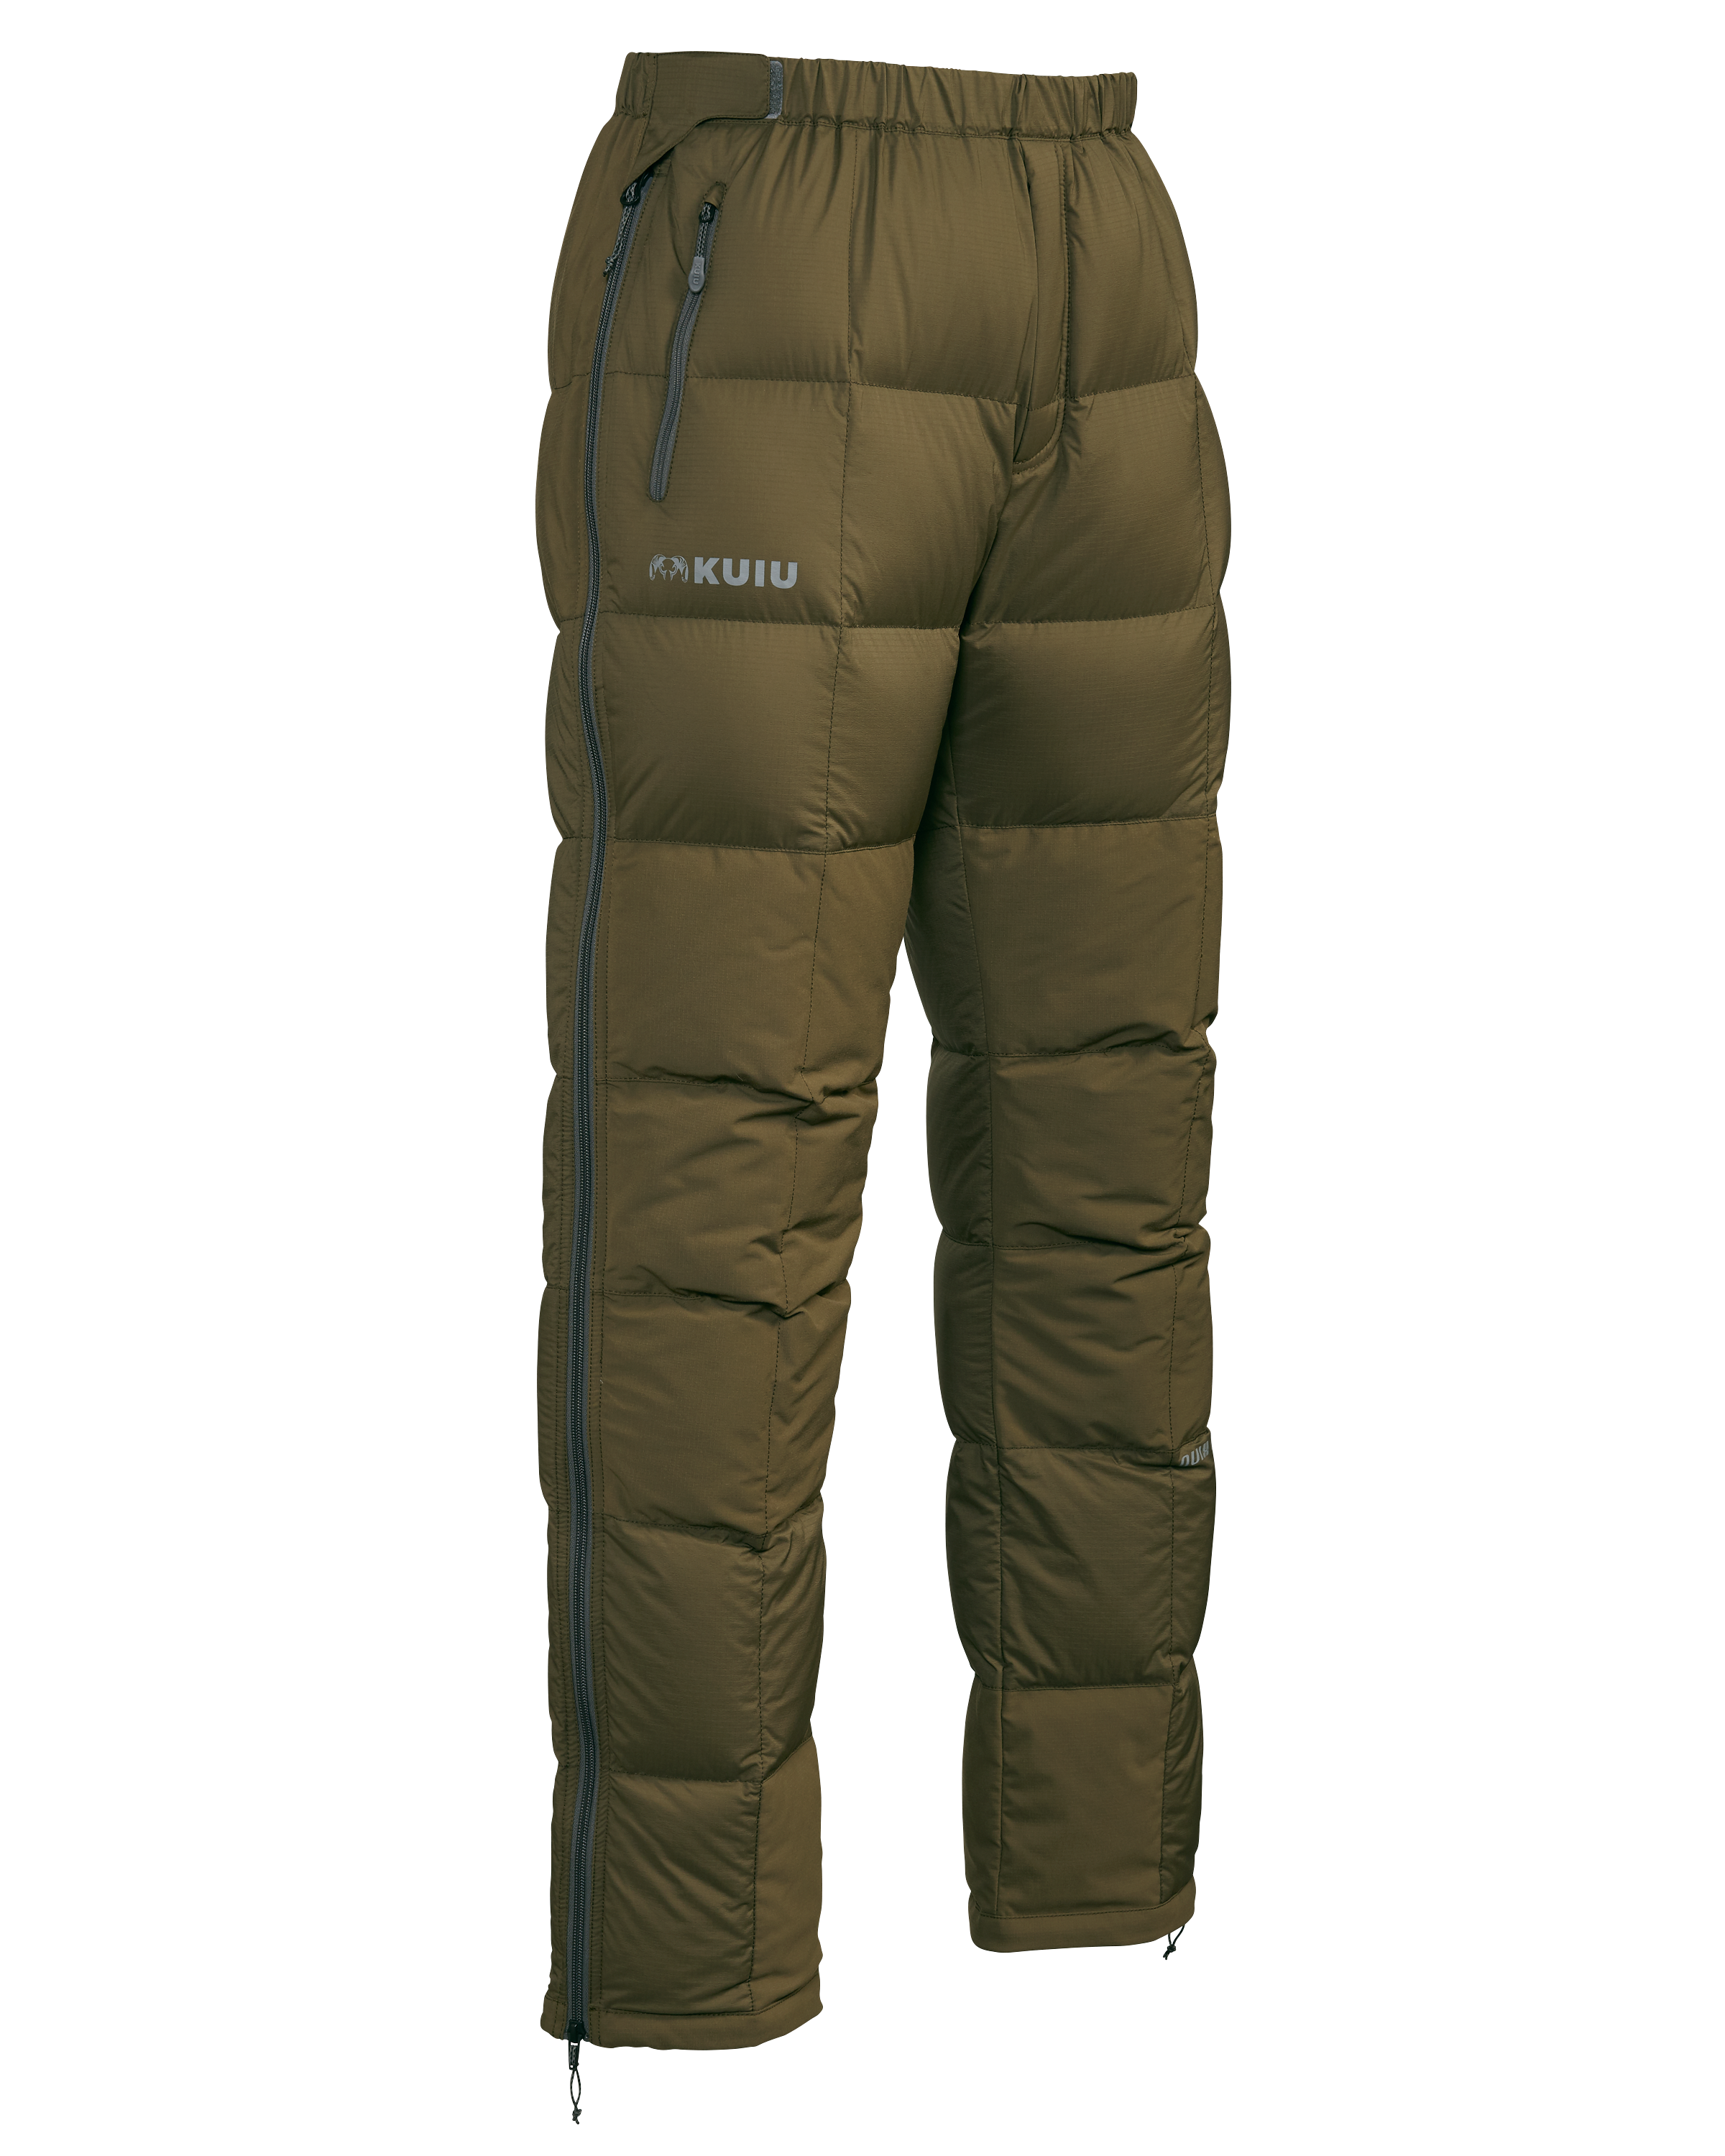 KUIU Super Down PRO Hunting Pant in Bourbon | Size XL